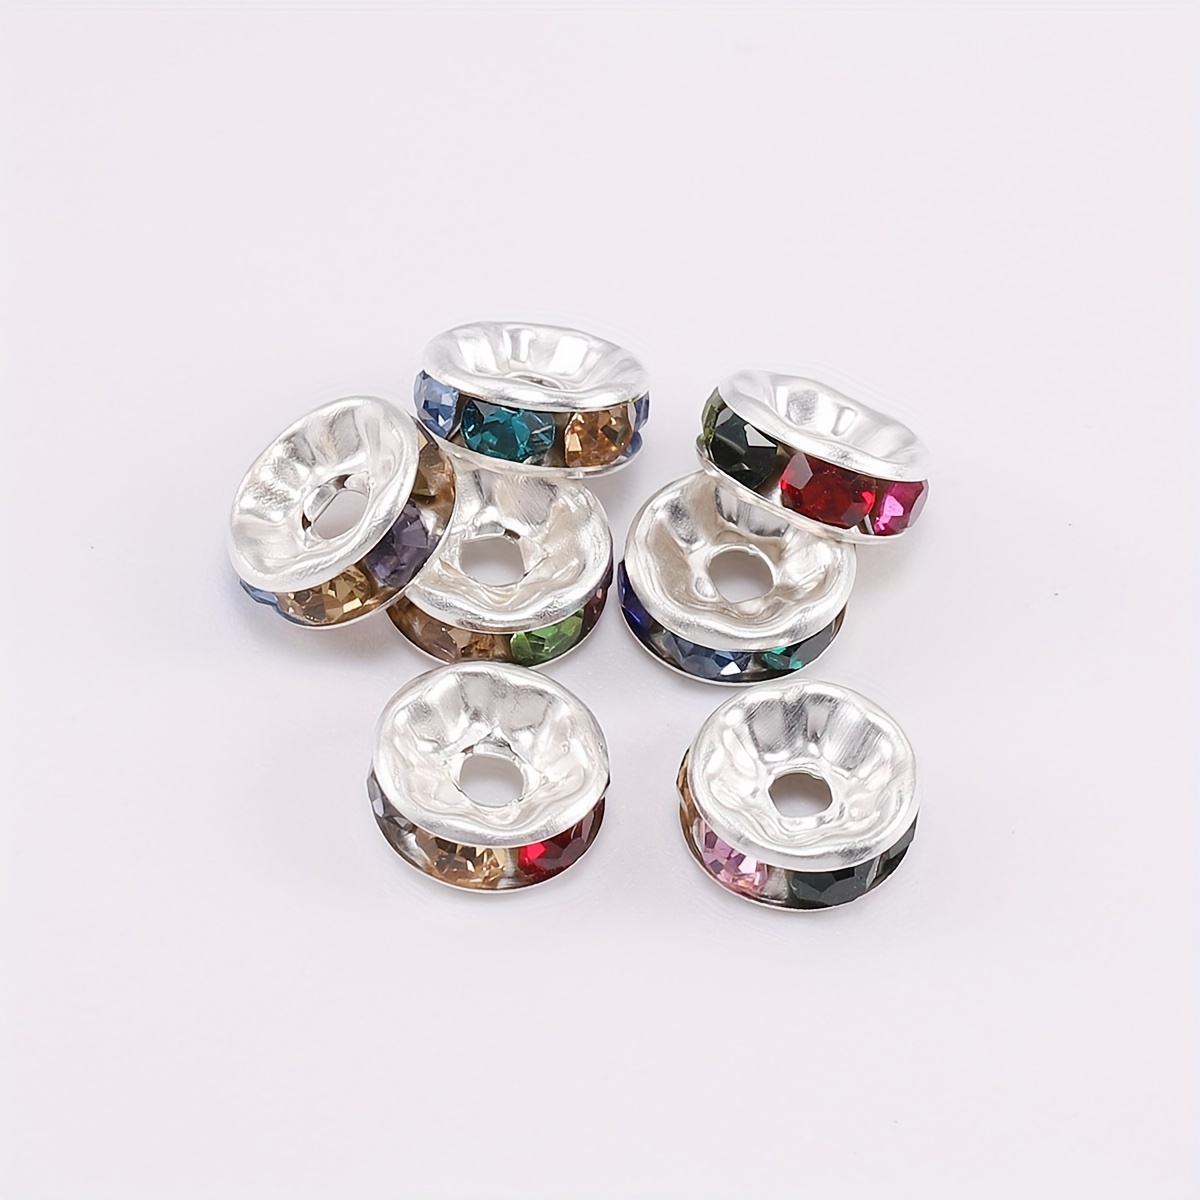 Aylifu spacer beads,200pcs mixed color crystal rondelle spacer beads silver  tone loose beads for jewelry making(8mm)